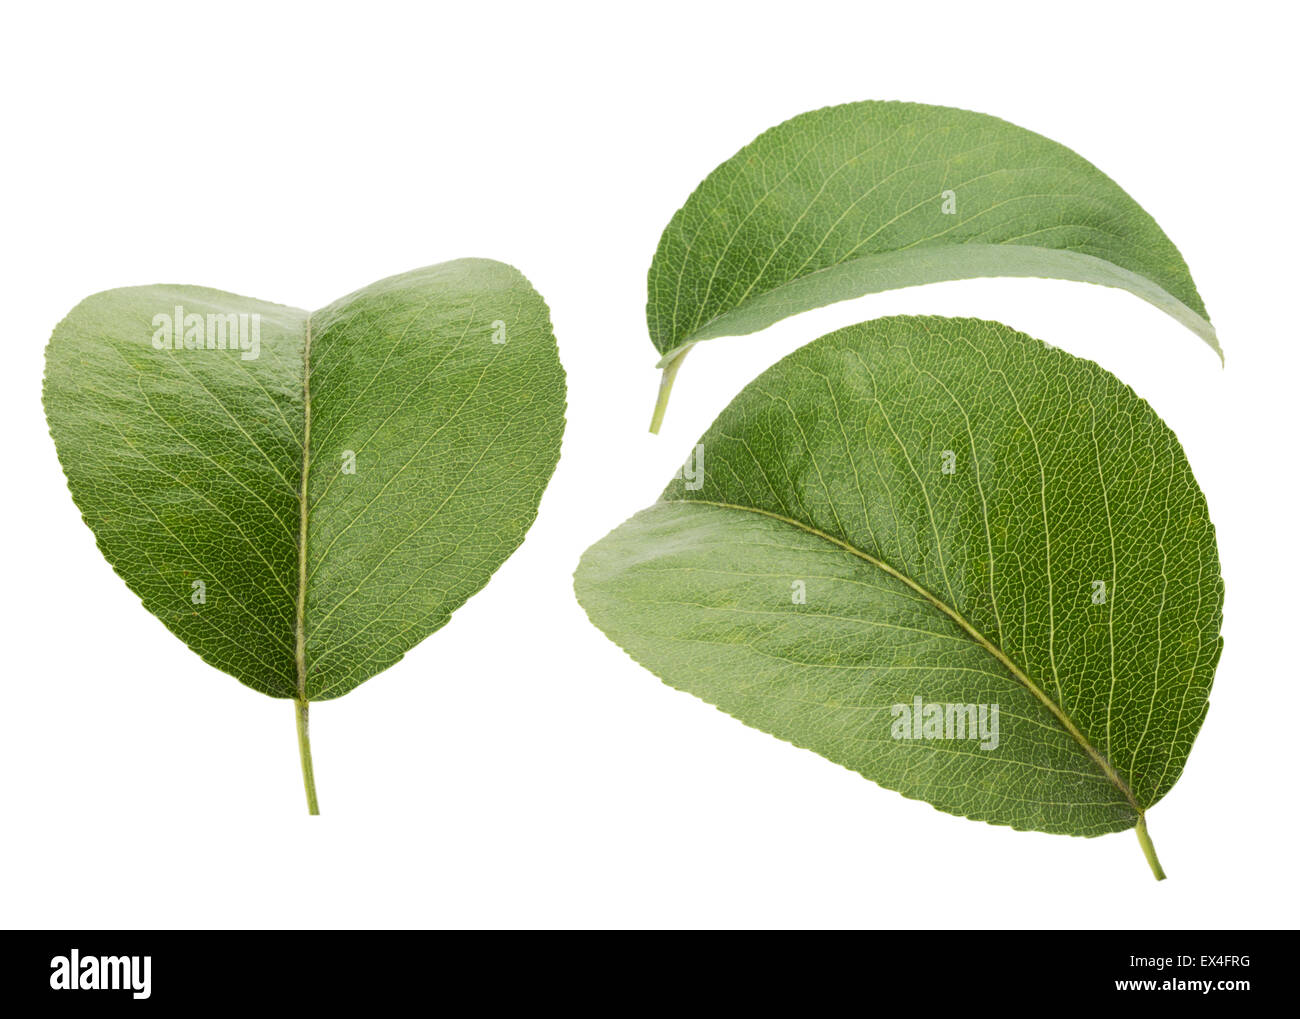 leaves of pear on the white background. Stock Photo